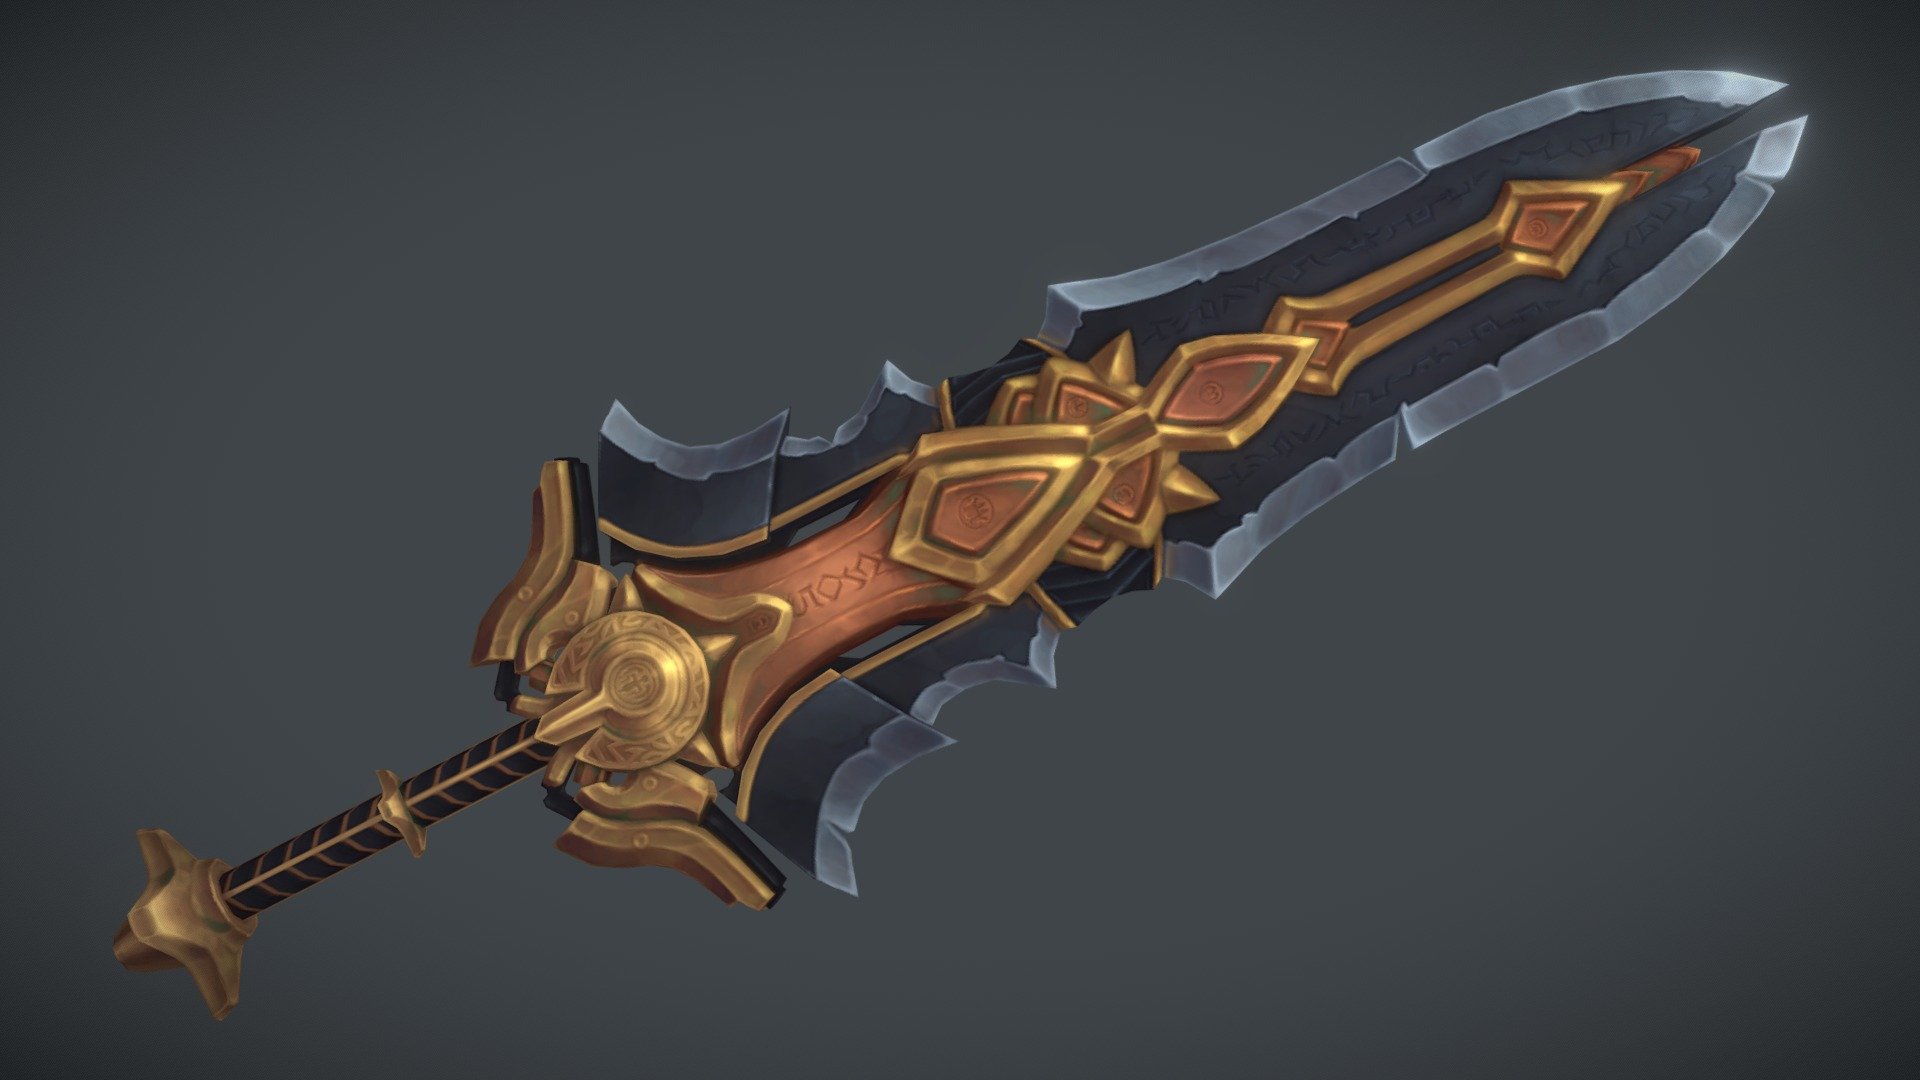 Fan art of the Armageddon Blade from Darksiders.
3.5k triangles, 512x512 texture.

Included is a video walkthrough of my project, showing off a method I use for a more flexible, non-destructive workflow - allowing for quick iteration and creation of colour palette variations.

Full project here: https://www.artstation.com/artwork/VyYbW8

Tutorial here: https://www.youtube.com/watch?v=9P7Ff2v1UiY - Darksiders' Armageddon Blade - Fan Art - 3D model by Piemaster 3d model